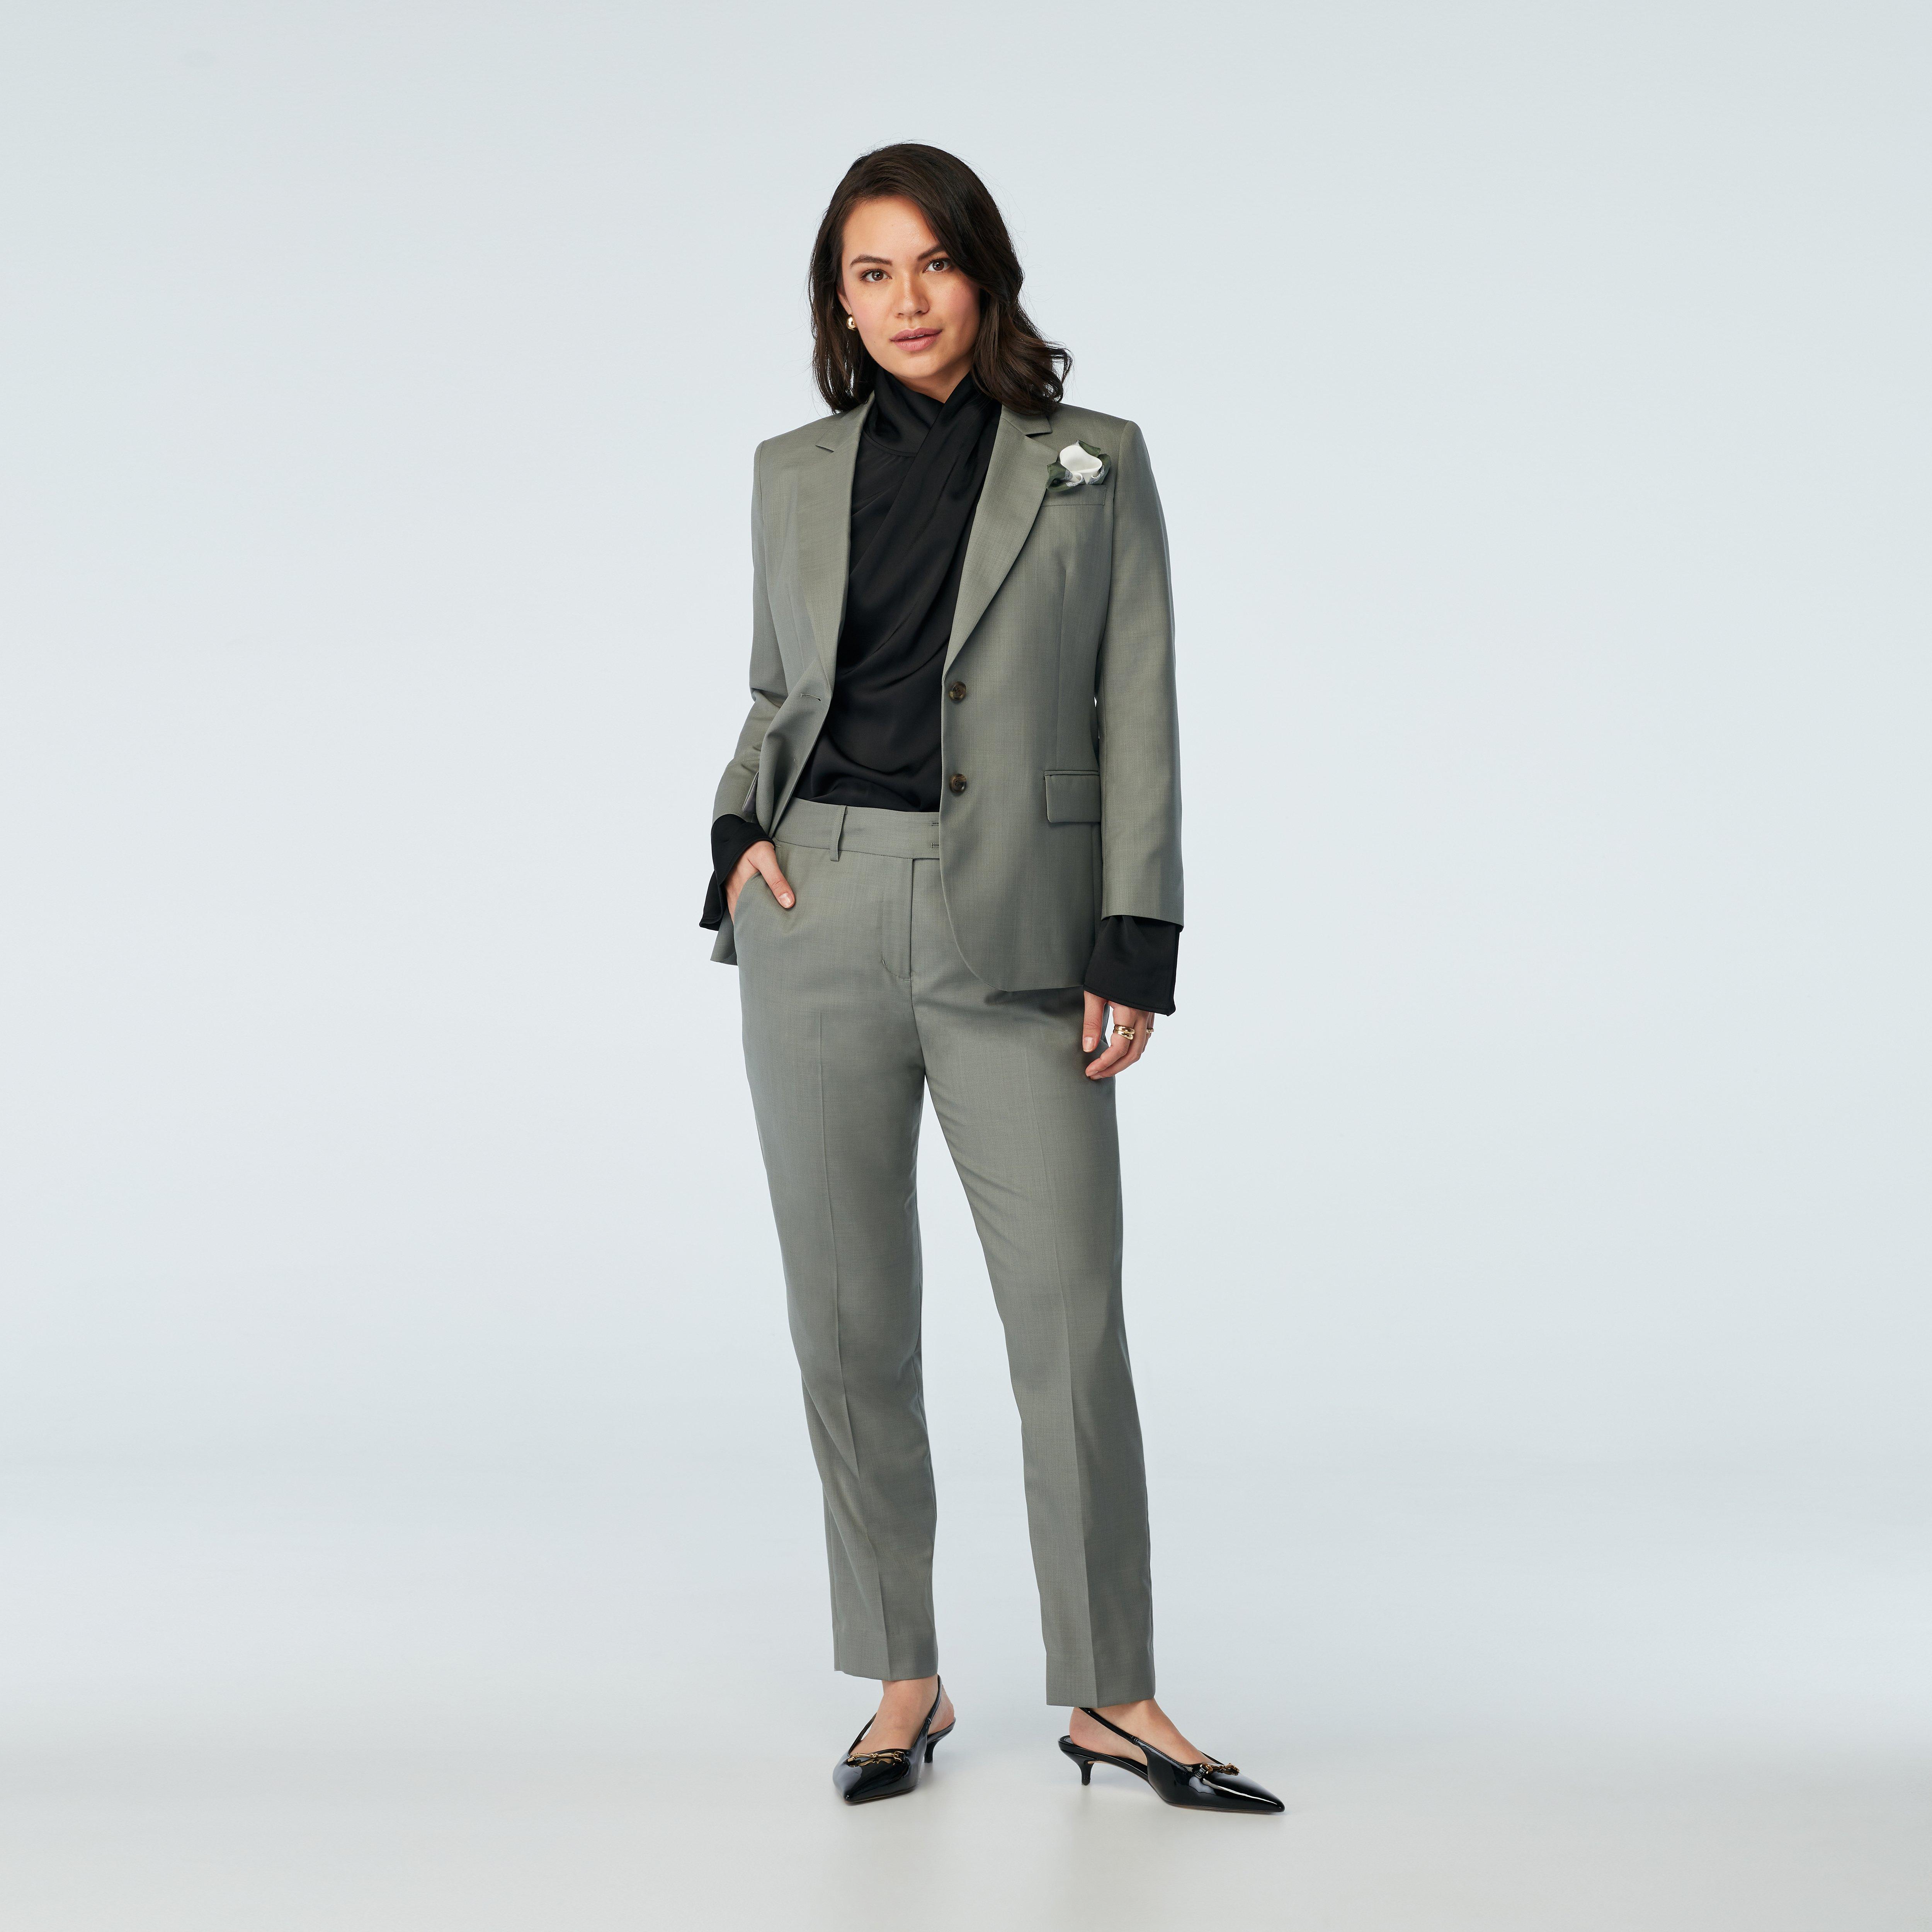 15 Grey Blazer Outfits That Are A Piece of Cake to Put Together